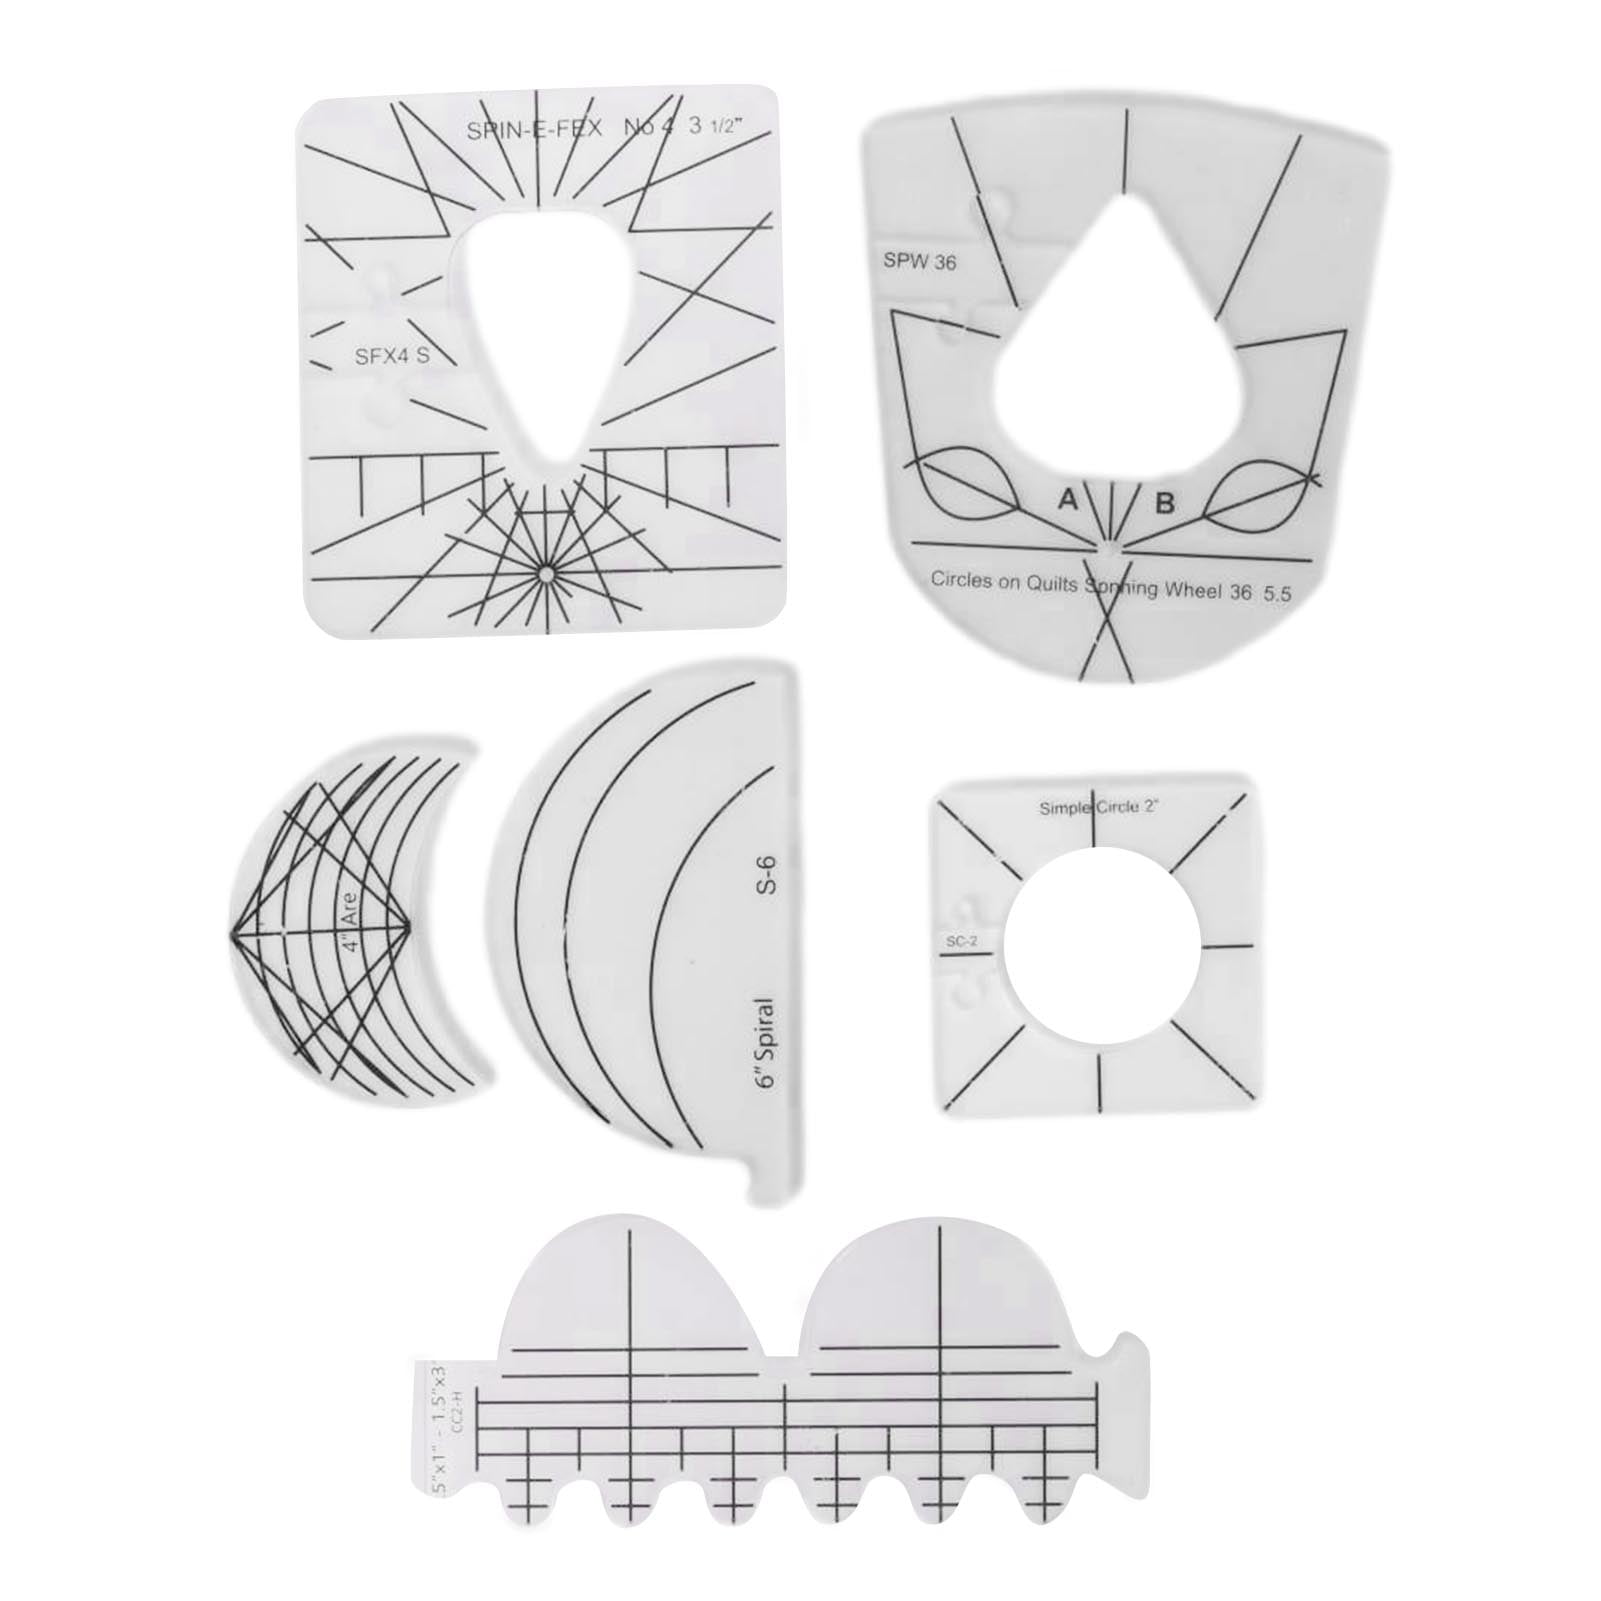 1 Set Acrylic Quilting Templates Rulers Sewing Machine Patchwork Wedding 